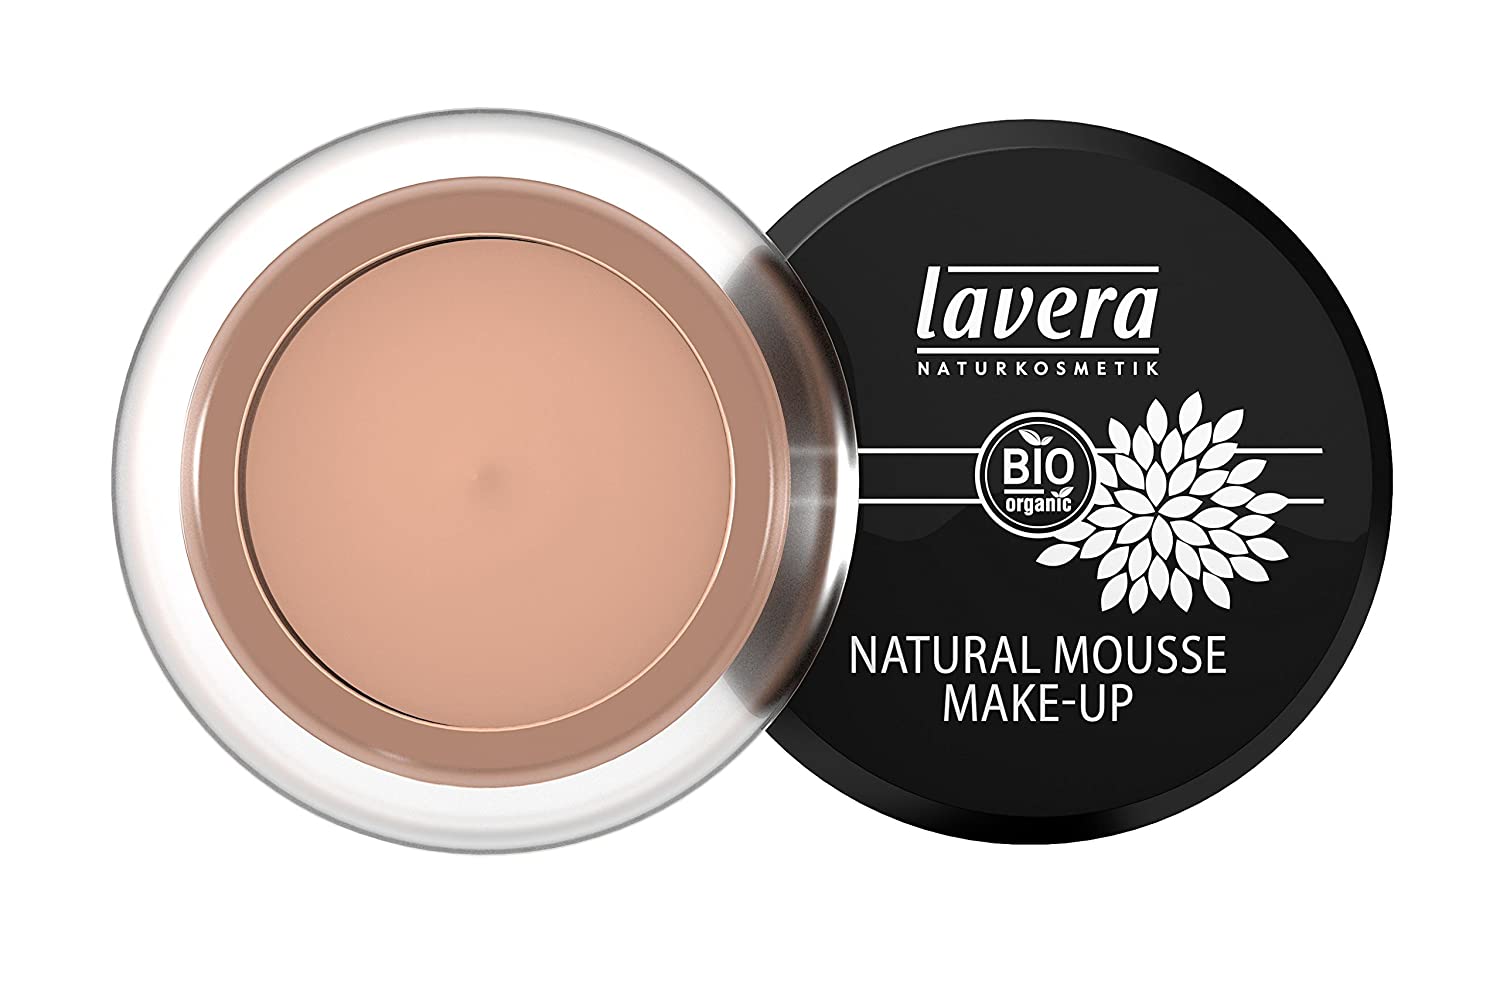 lavera Natural Mousse Makeup Foundation Colour Almond Skin Colour Matte Complexion & Creamy Texture Natural & Innovative Make Up Vegan Organic Plant Active Ingredients Natural Cosmetics Complexion Cosmetics 1 Pack (1 x 15 g), ‎almond